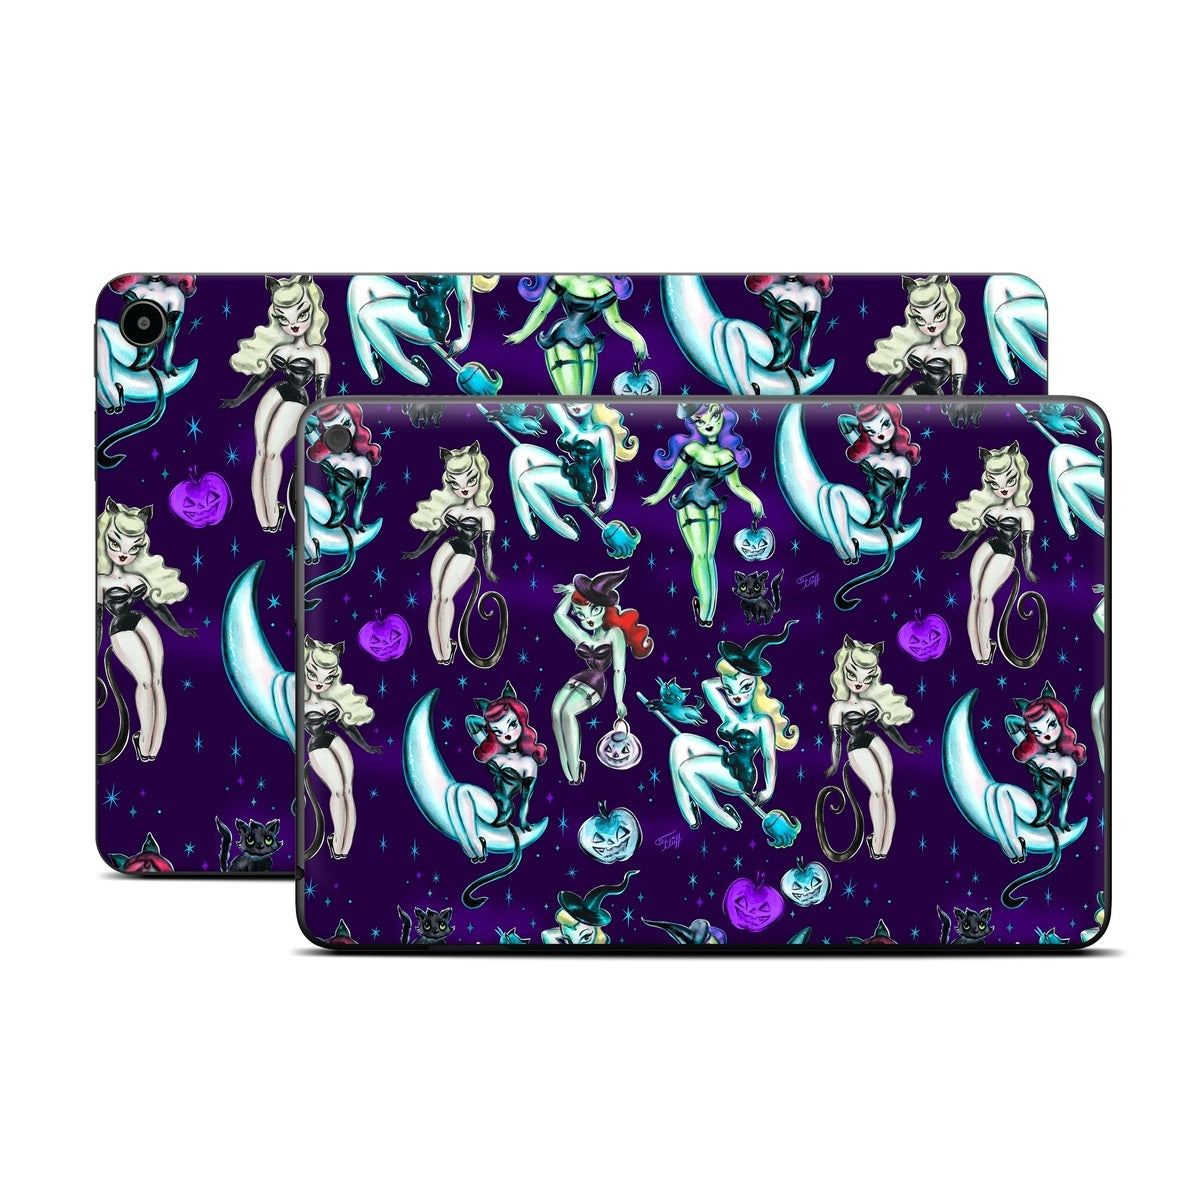 Witches and Black Cats - Amazon Fire Skin